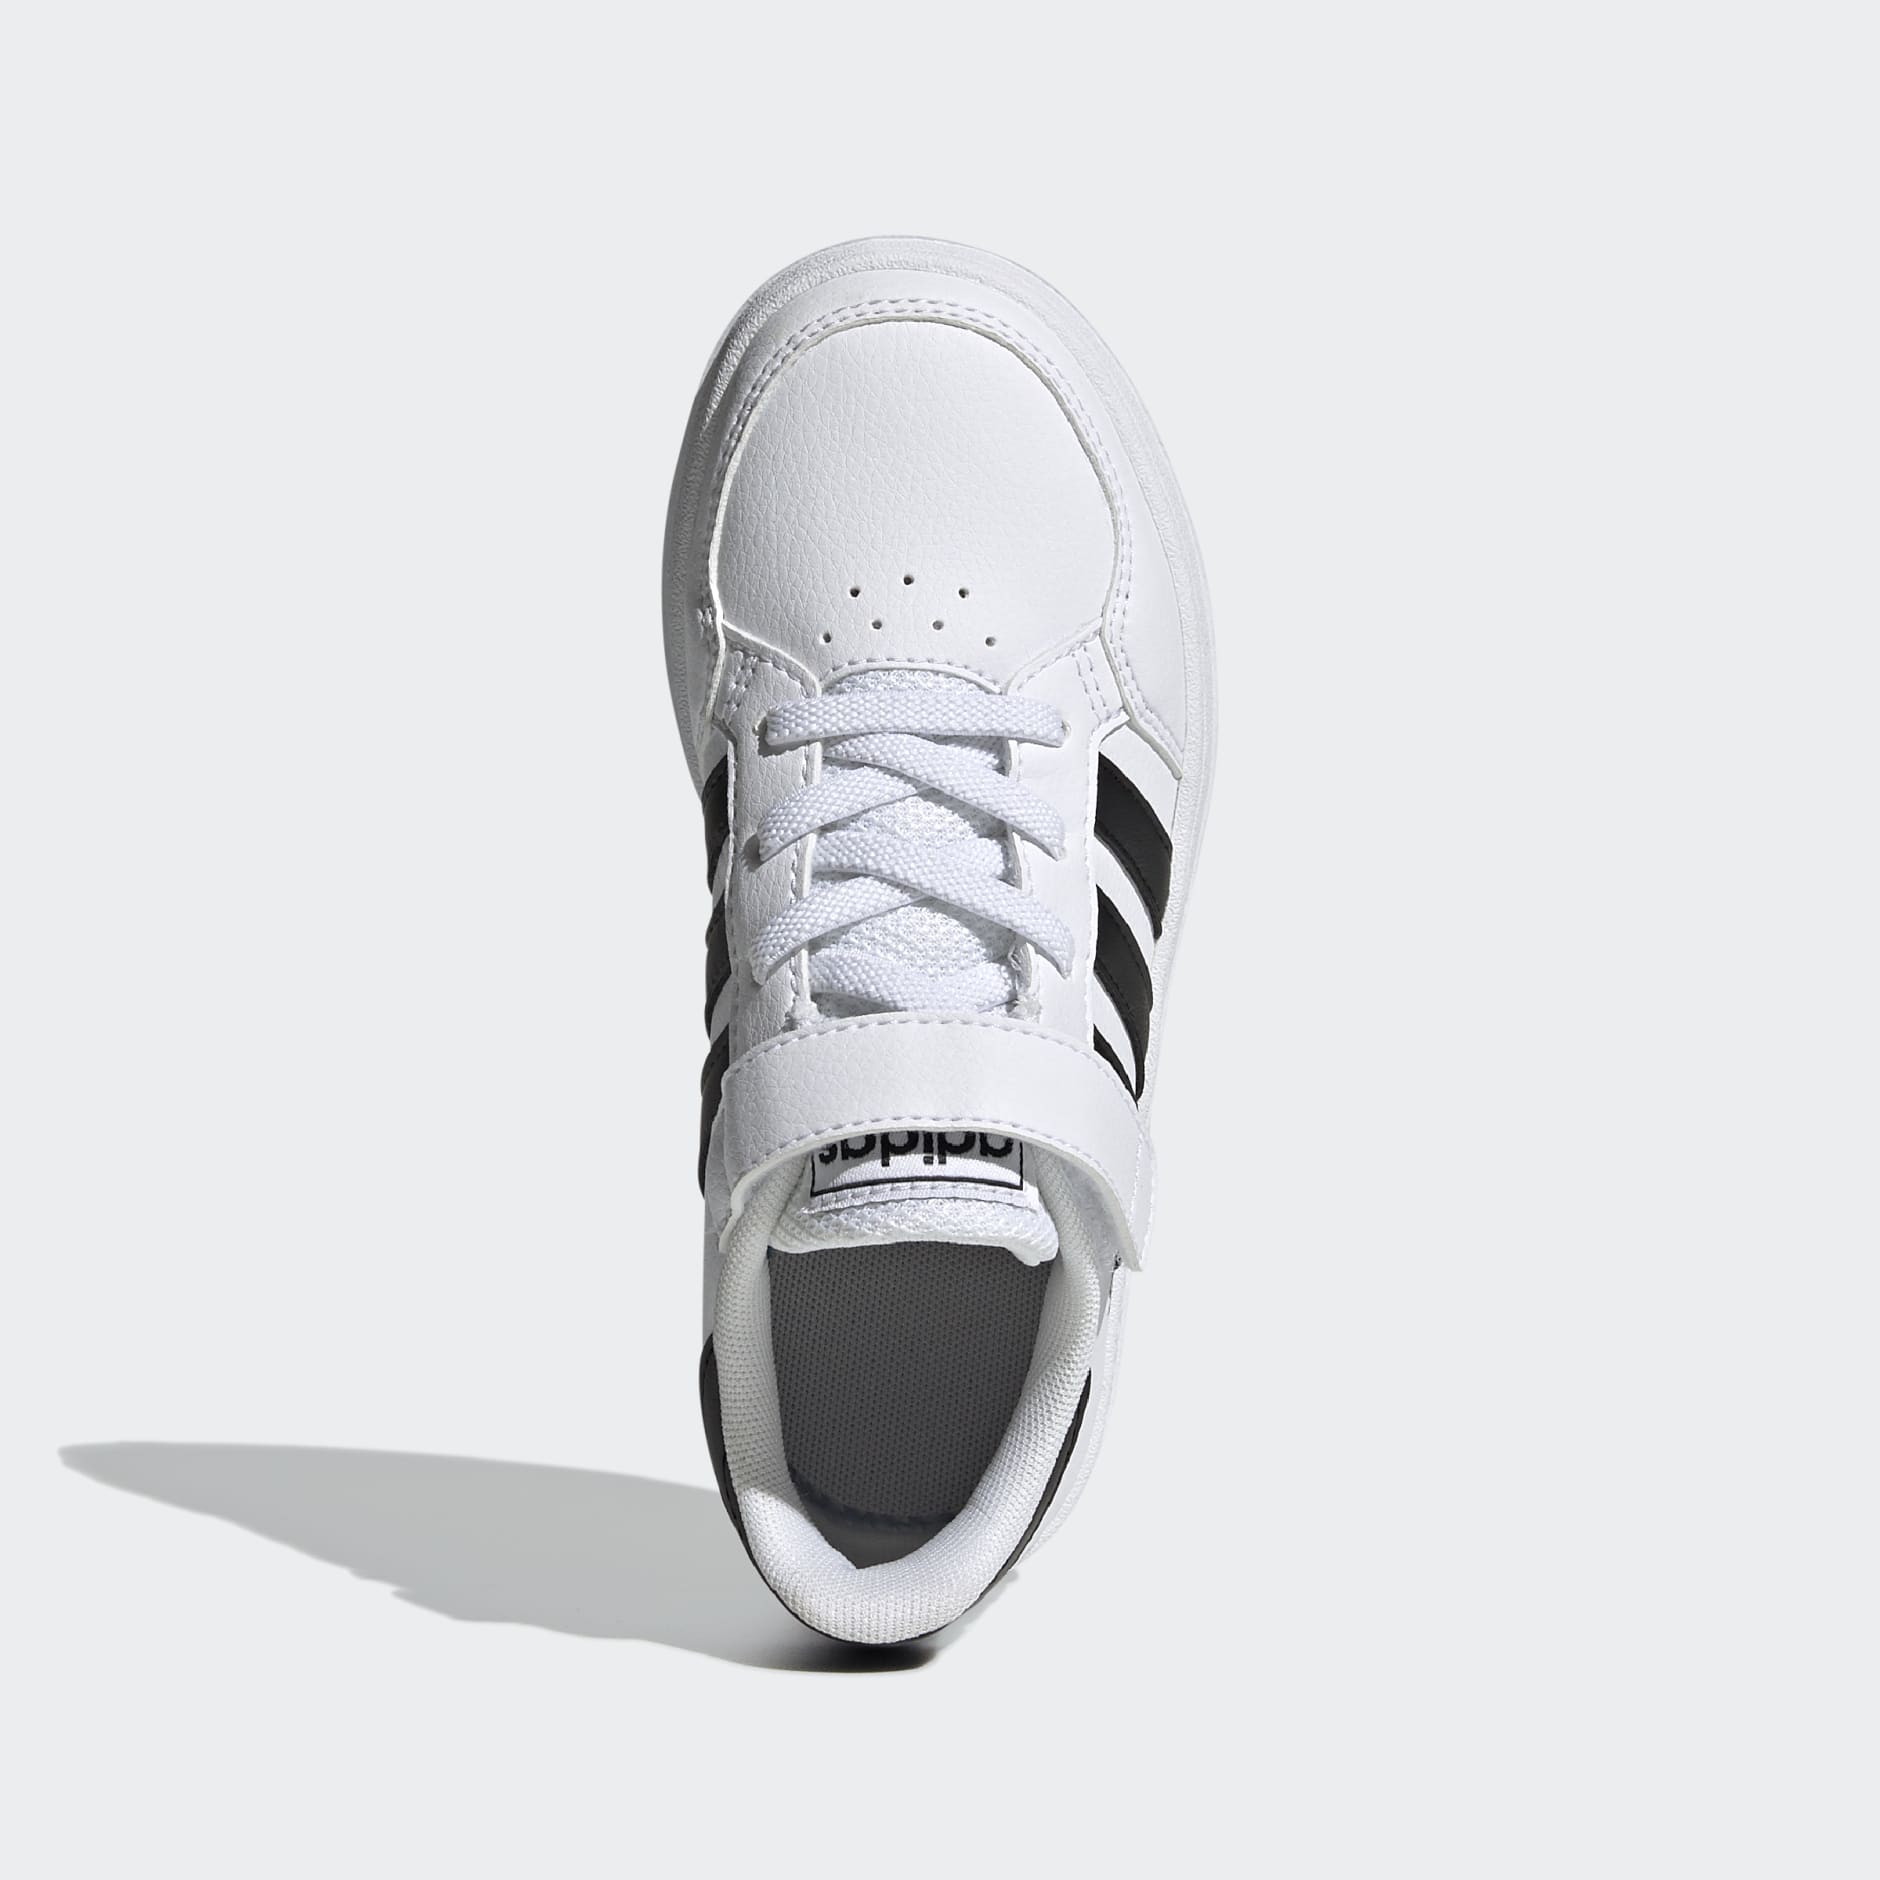 Shoes - Breaknet Shoes - White | adidas South Africa